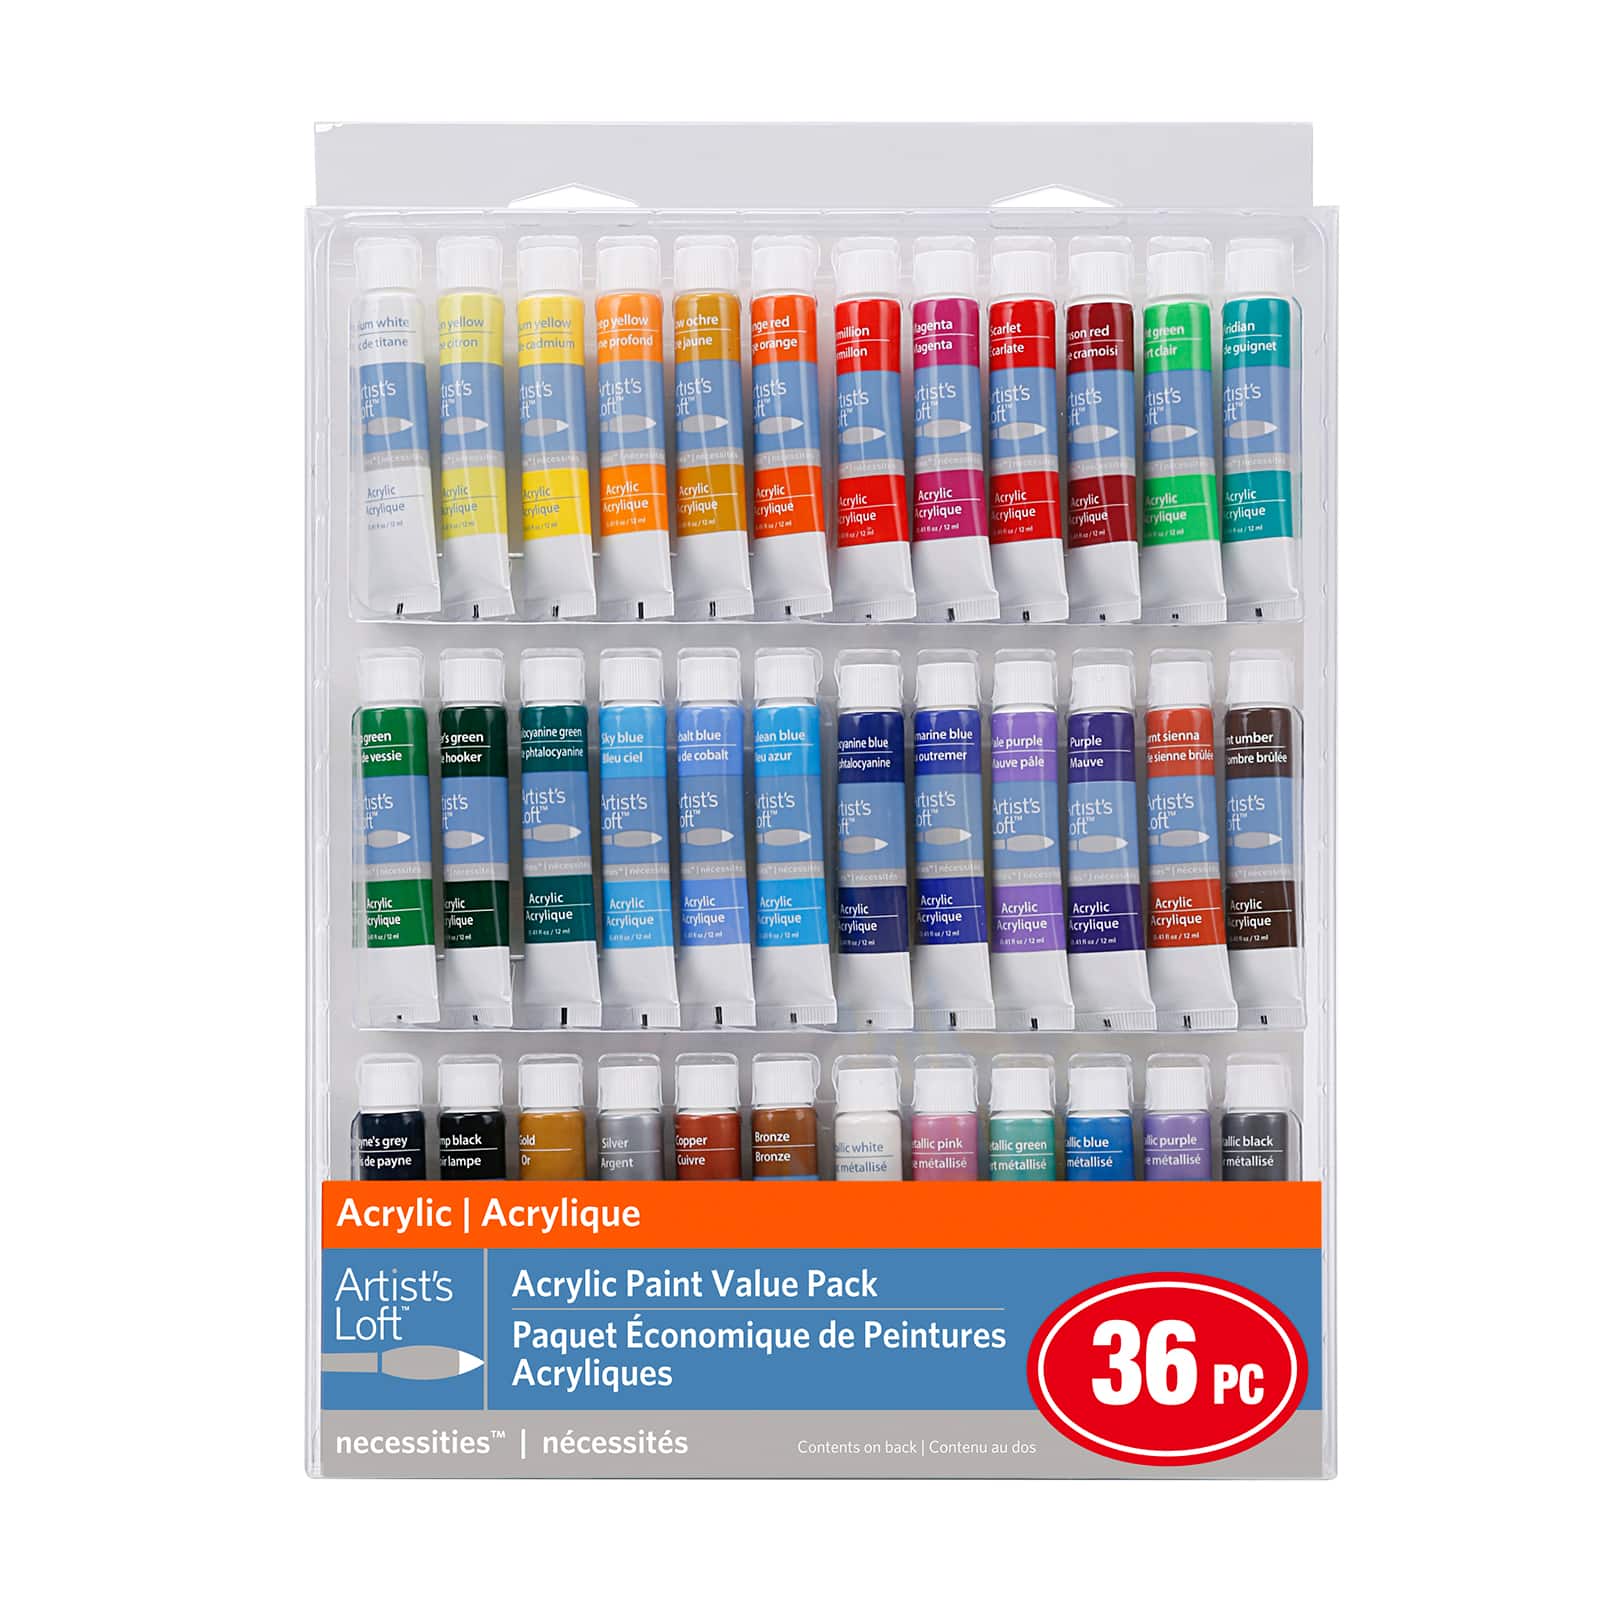 12 Packs: 36 ct. (432 total) Acrylic Paint Value Pack by Artist's